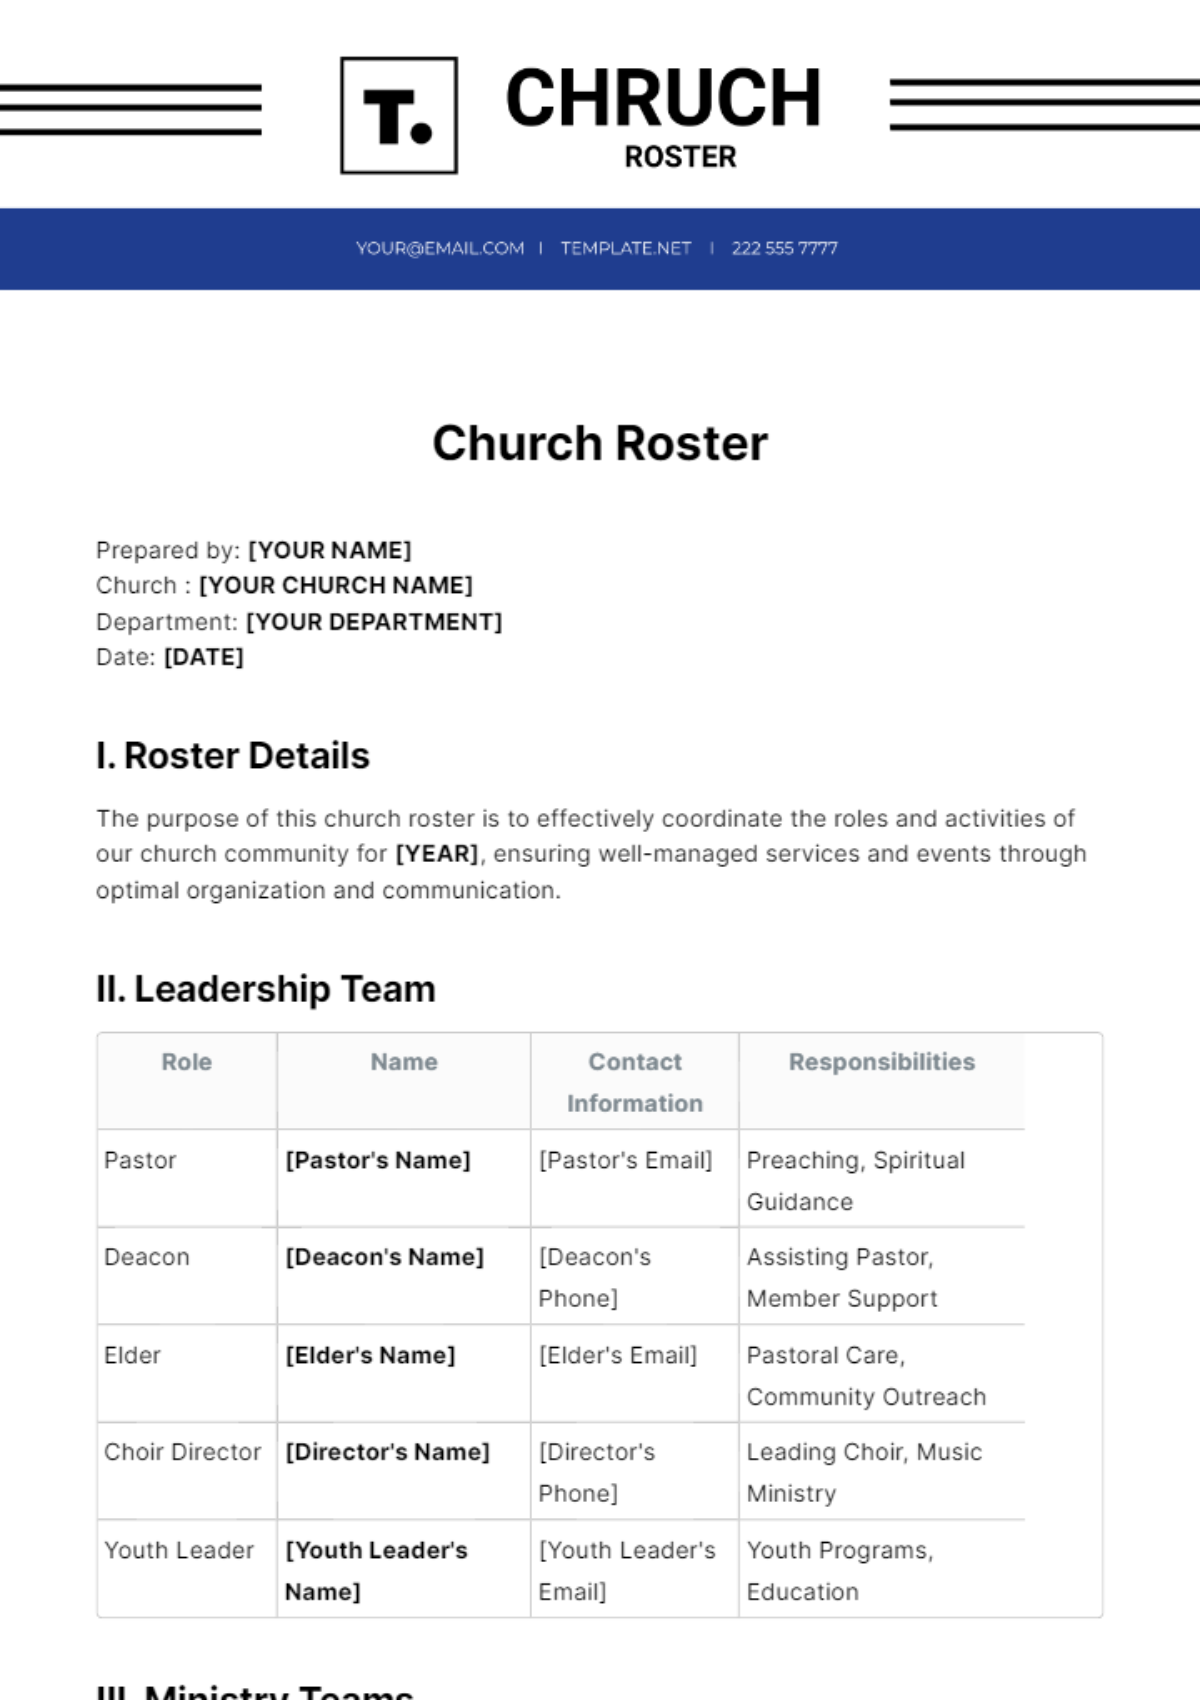 Church Roster Template